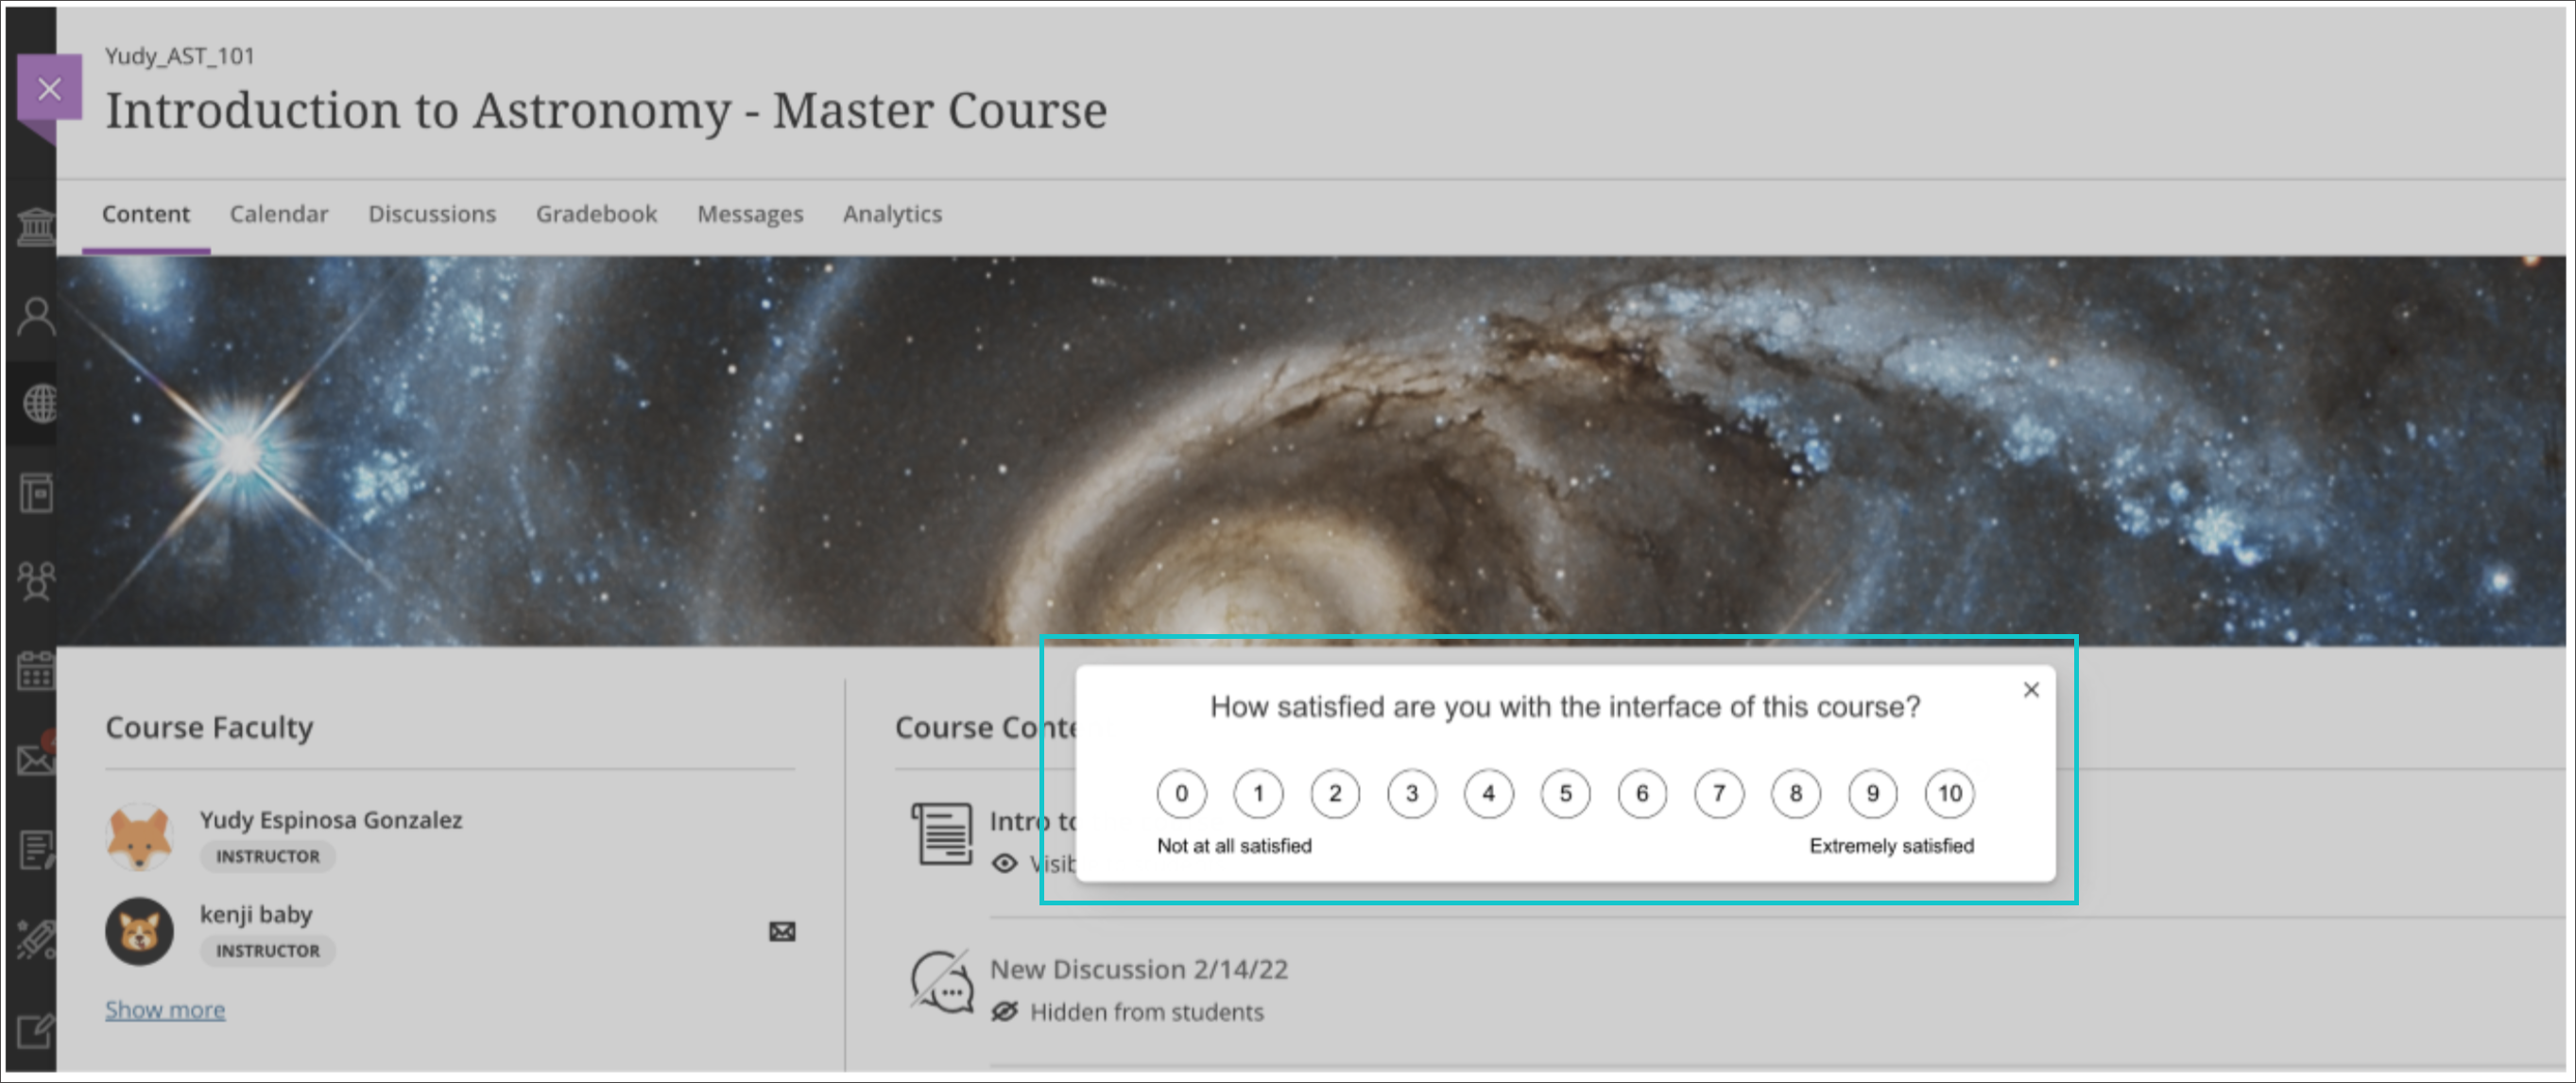 Example of a user engagement survey for a student